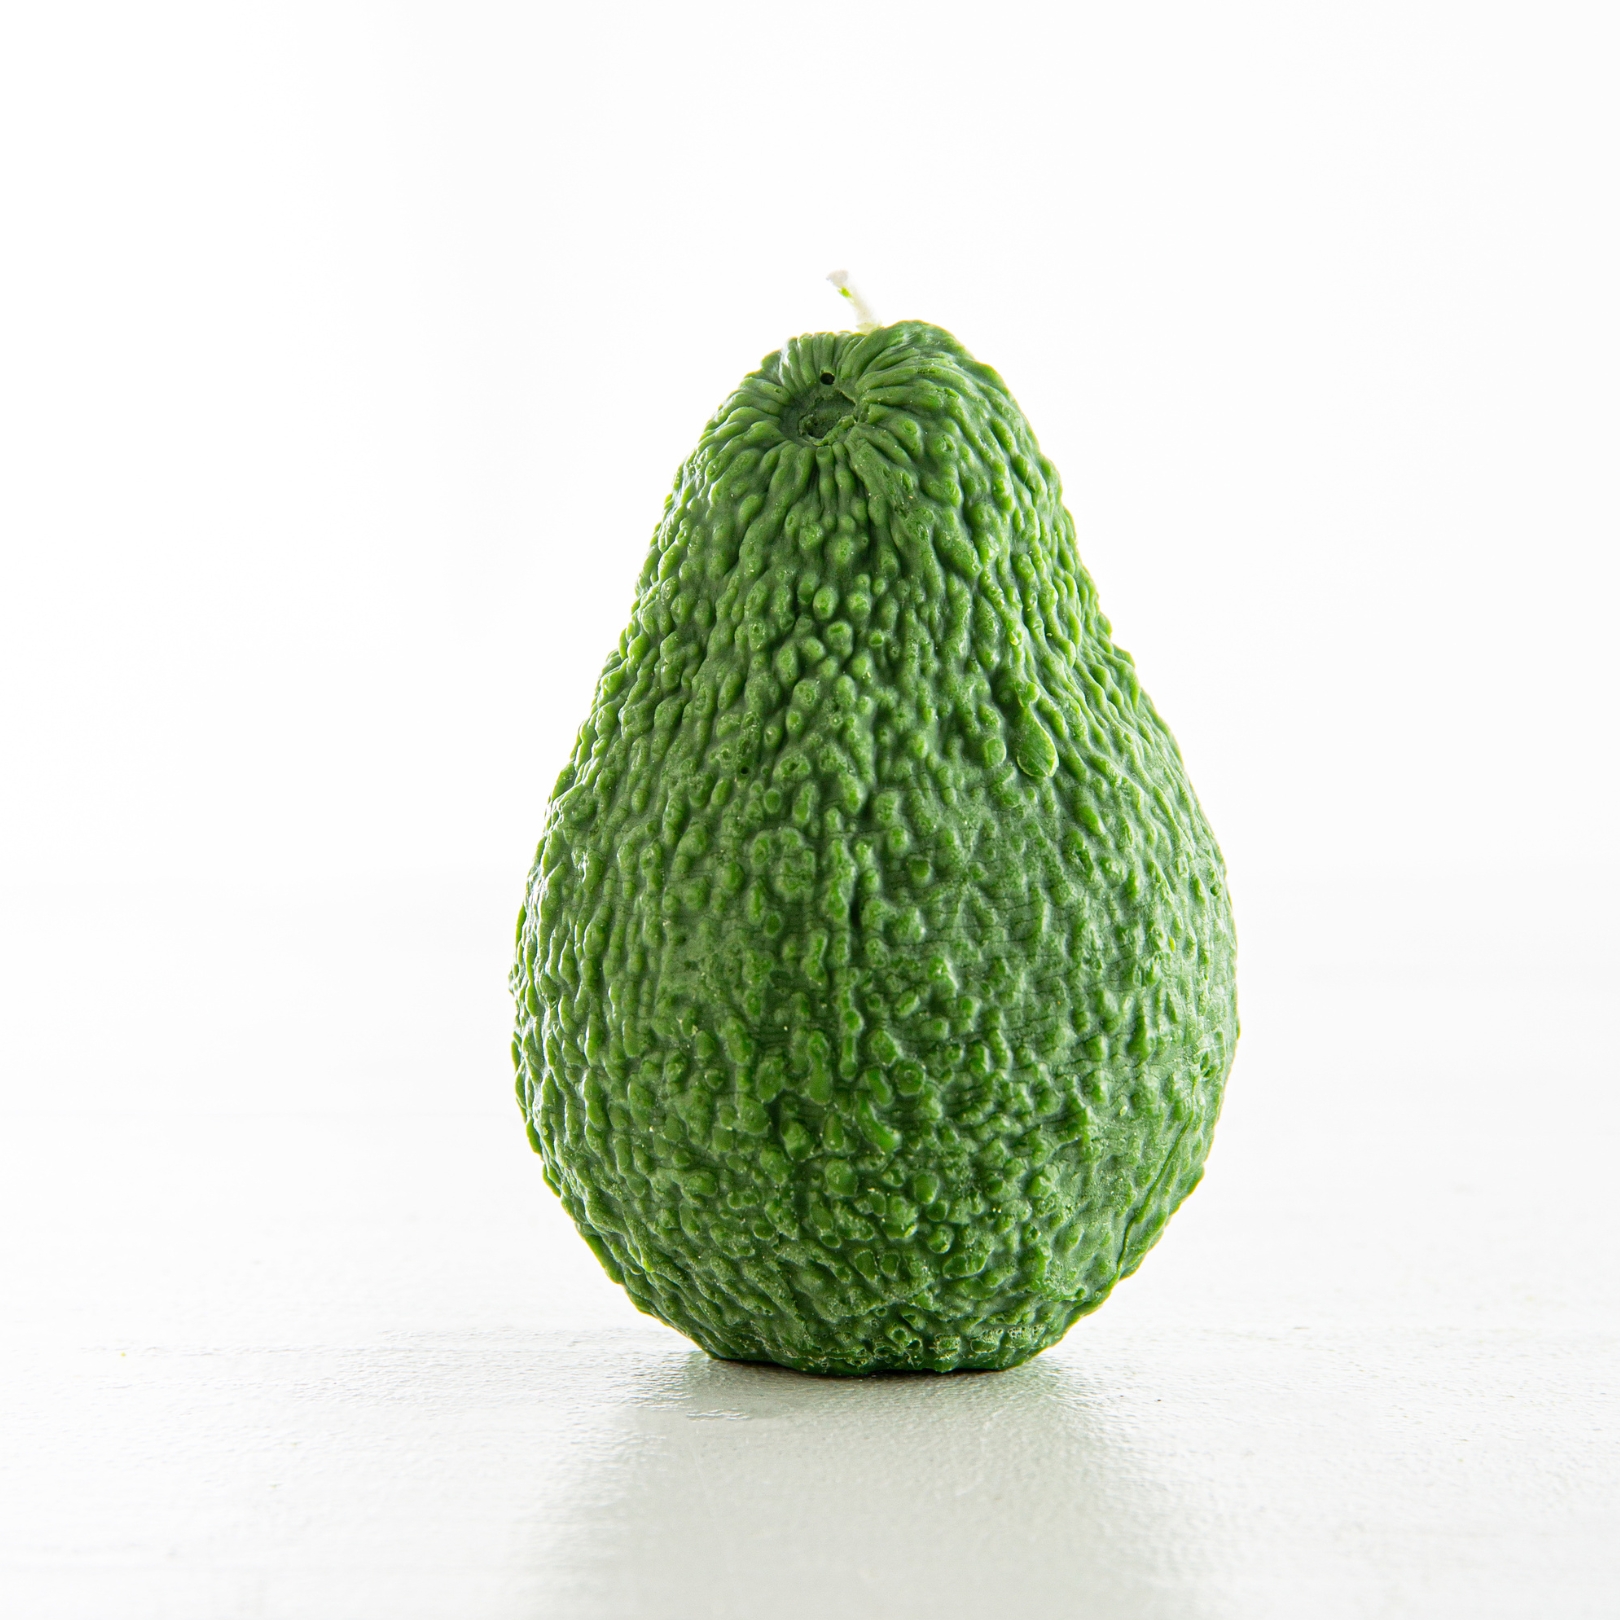 Buy The Avocado Candle Online NZ - Twisted Citrus